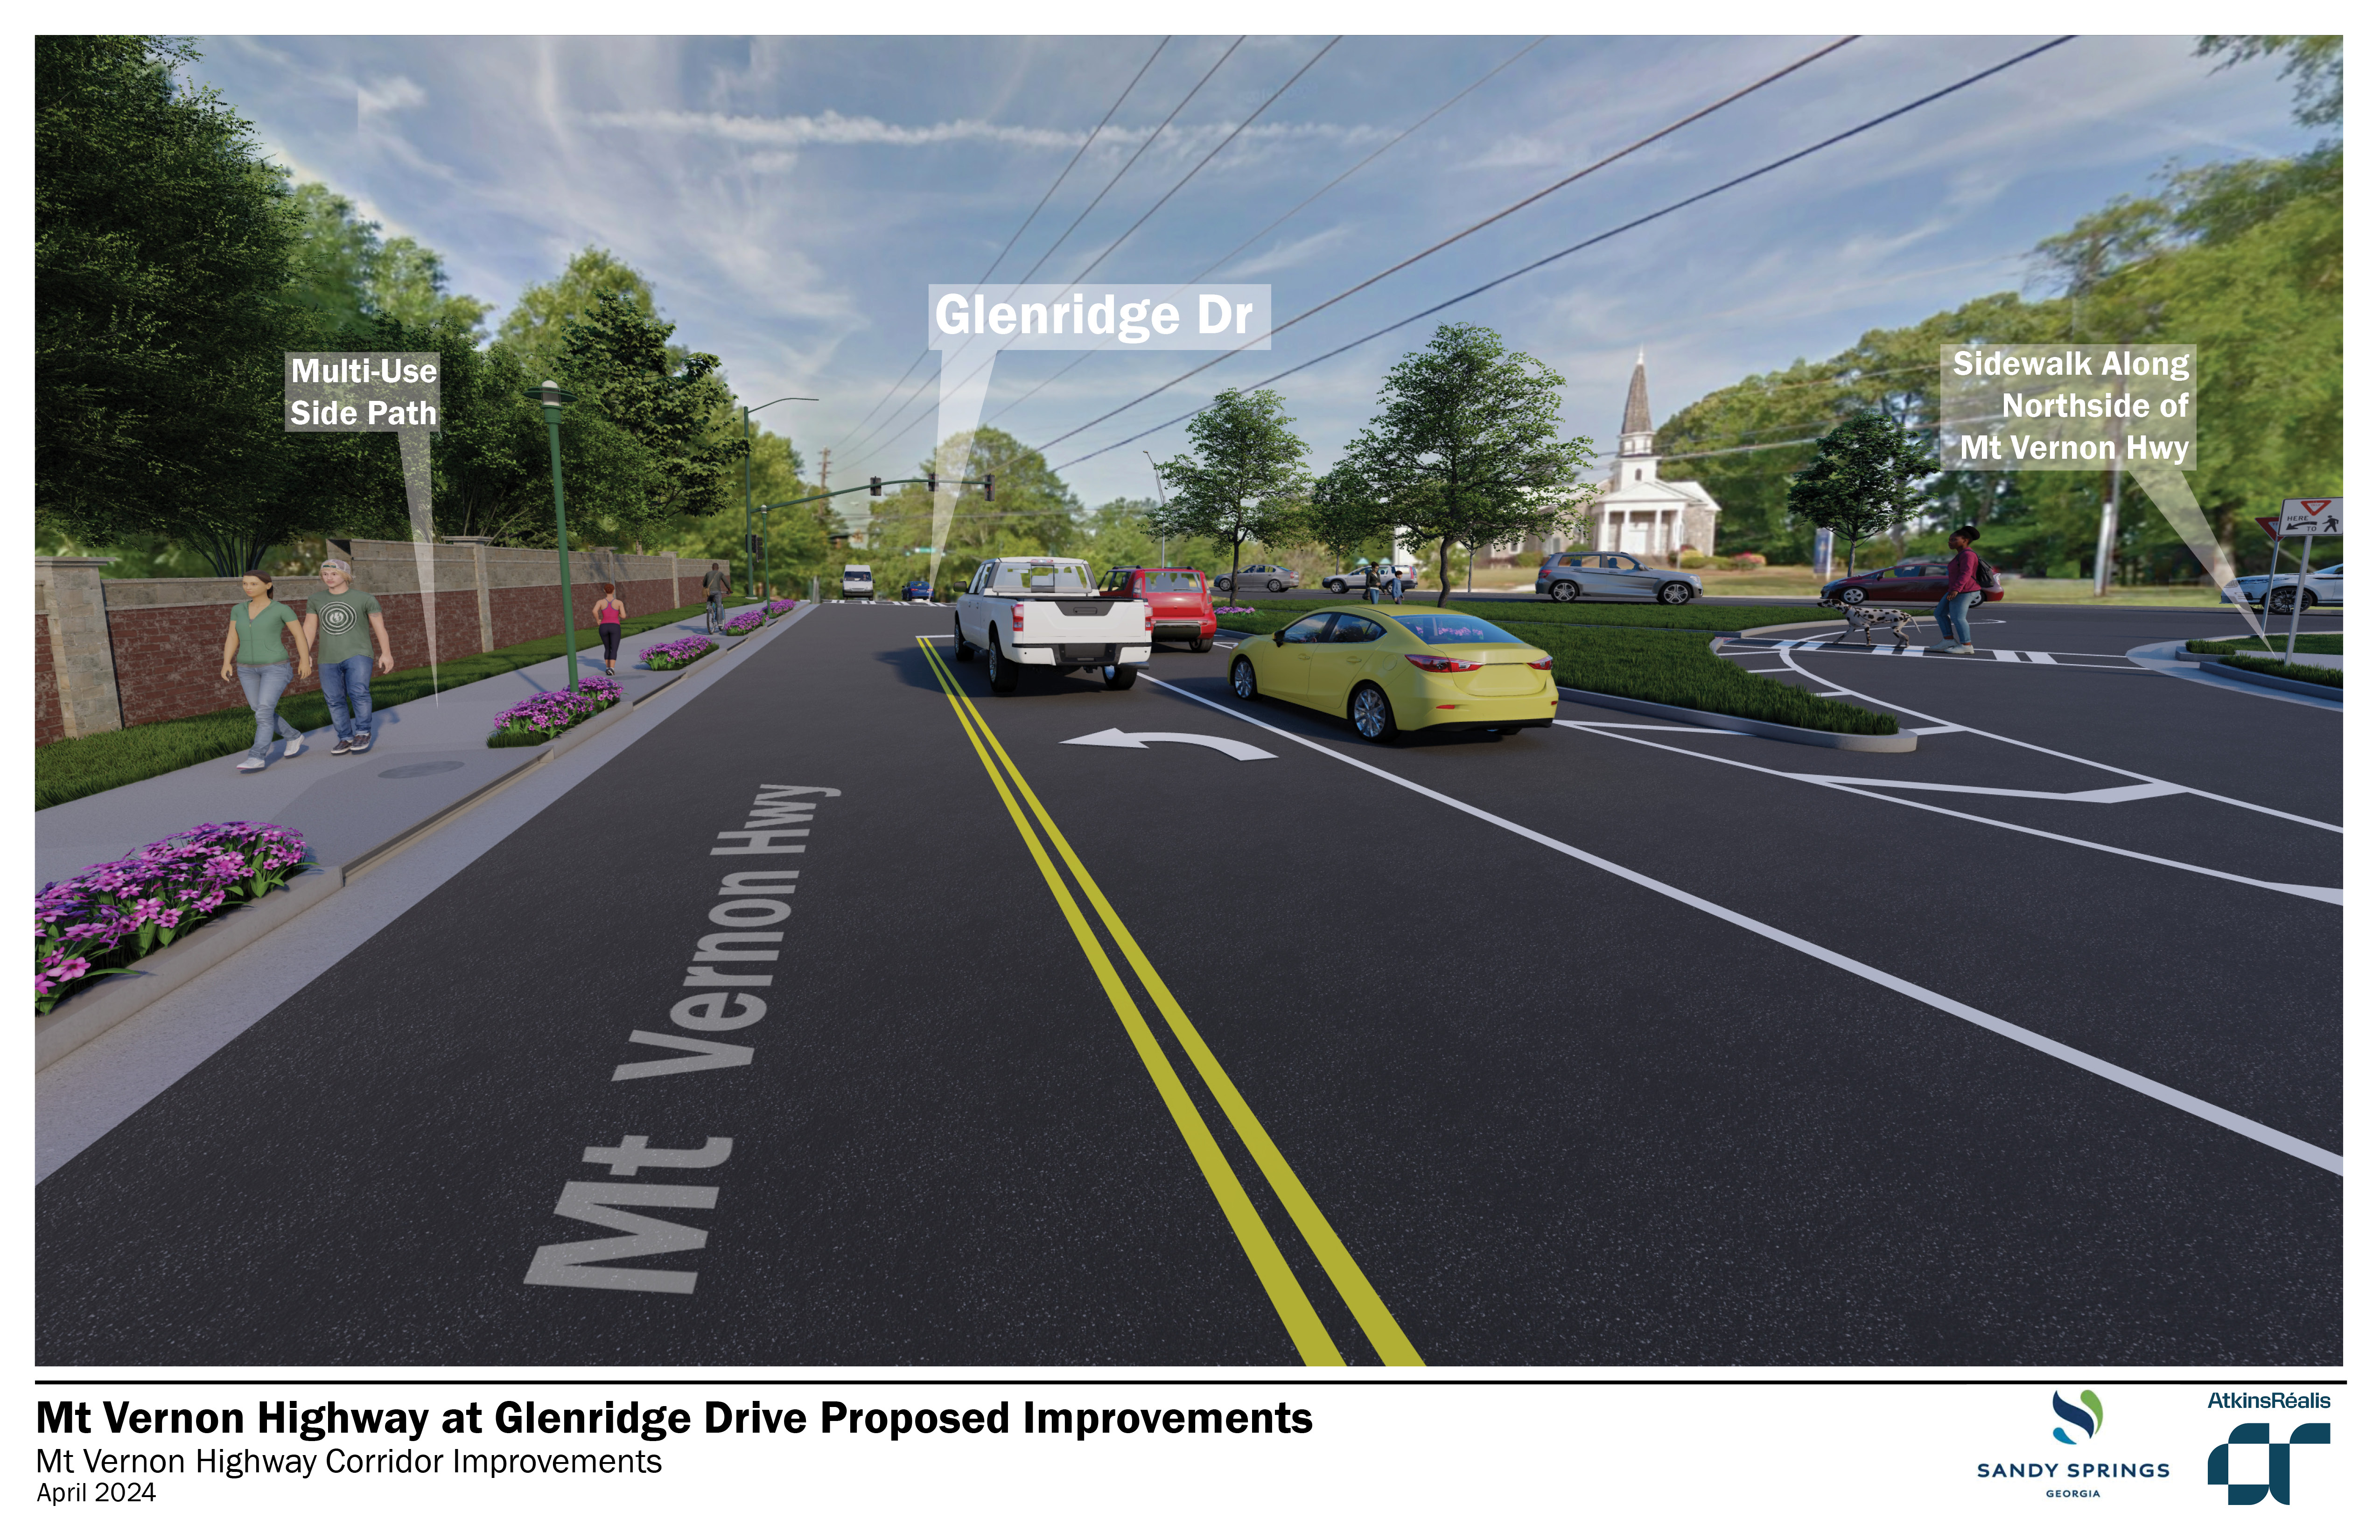 Rendering showing the proposed final configuration of the Glenridge Drive/Mount Vernon Highway intersection